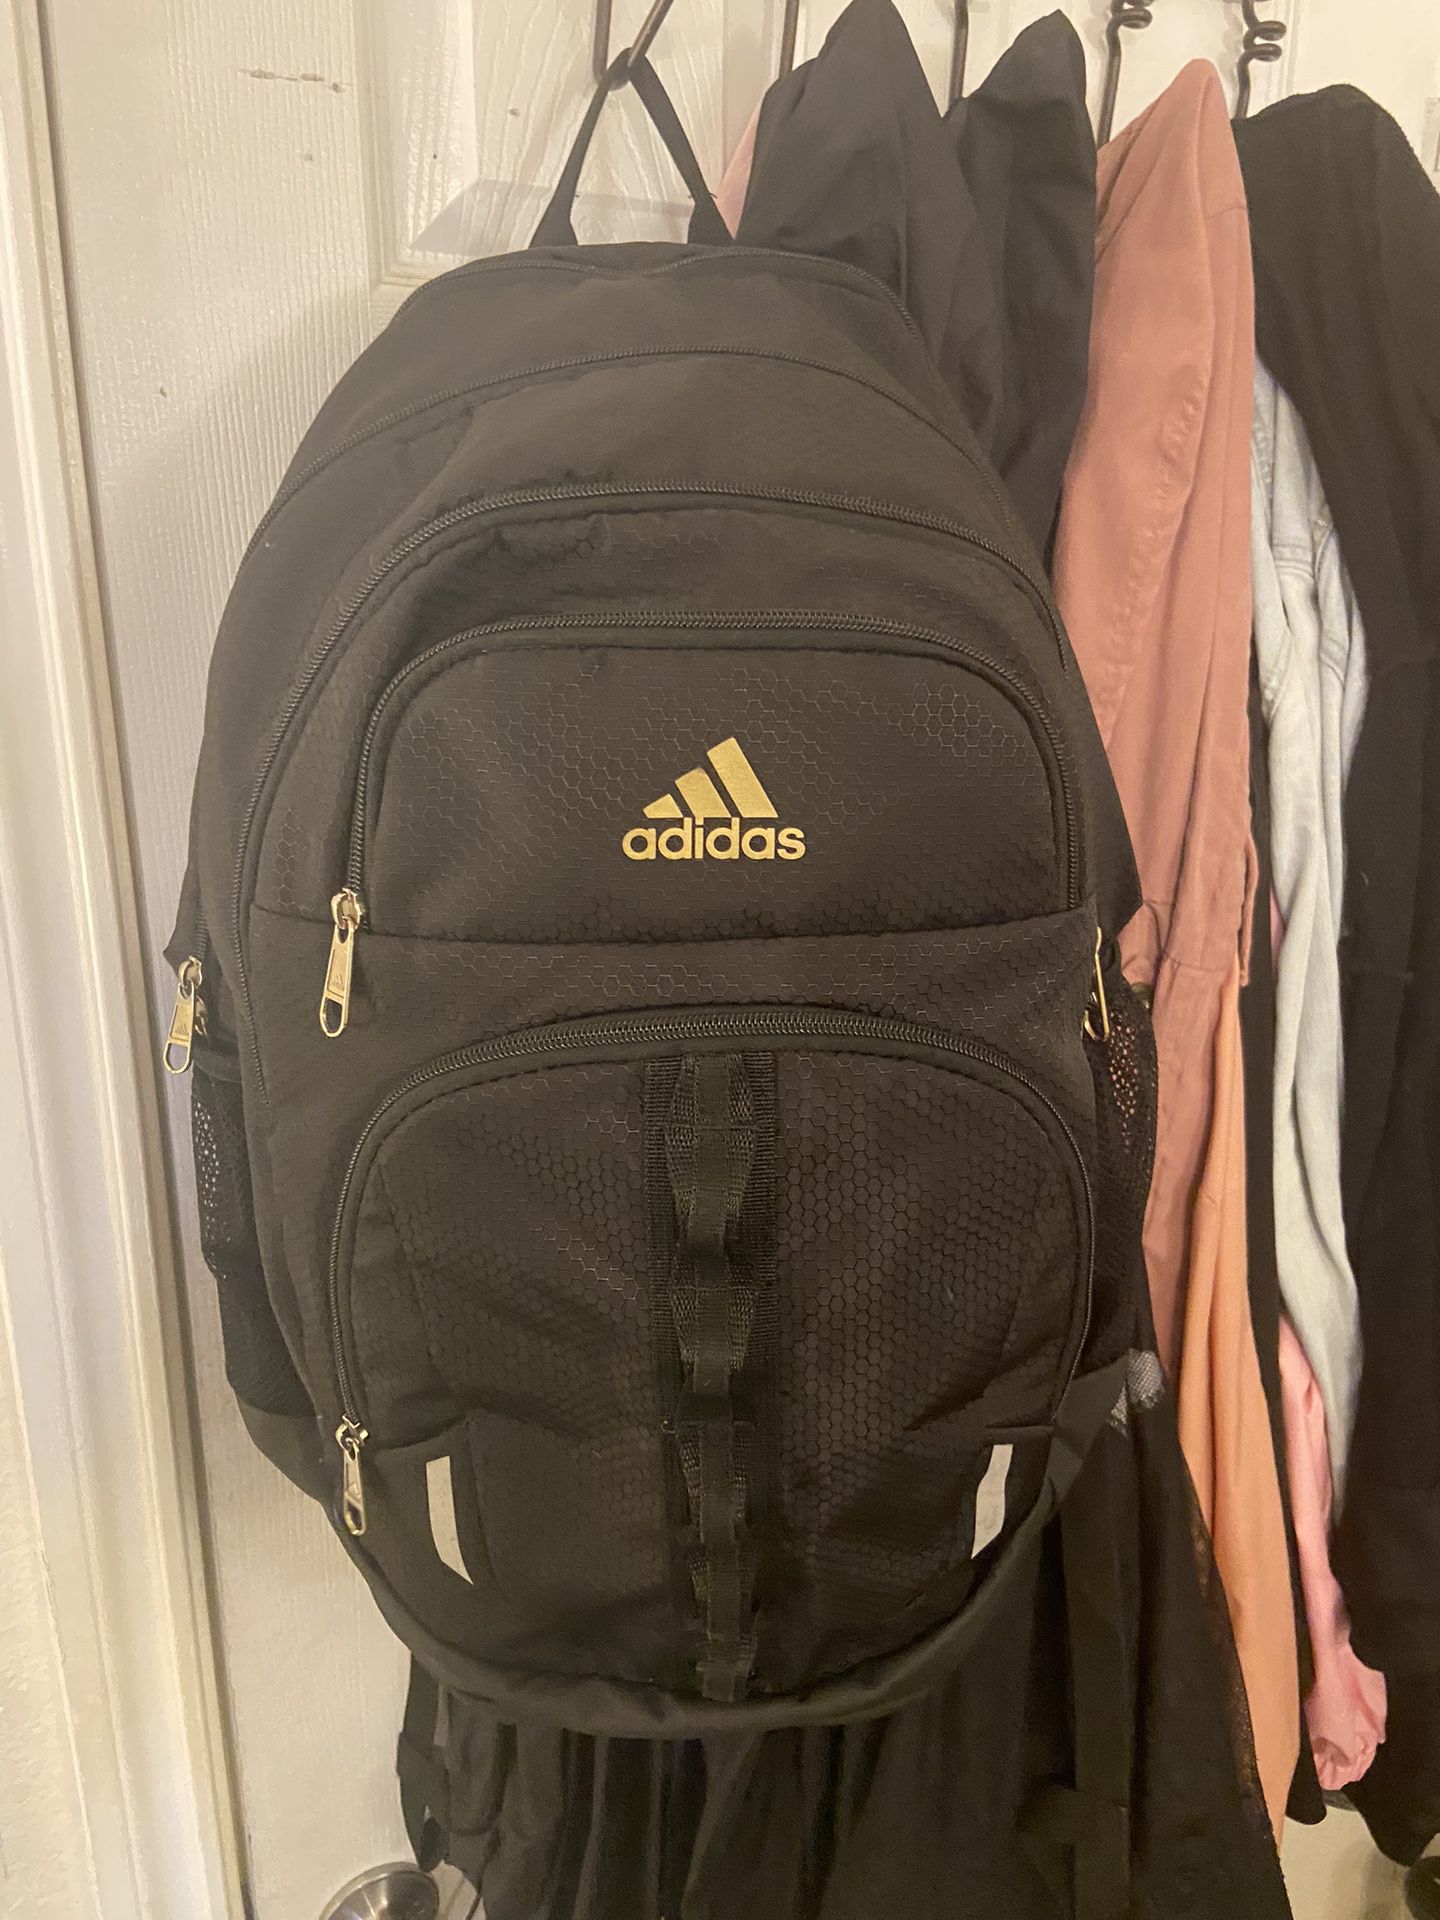 Adidas Black And Gold Backpack 